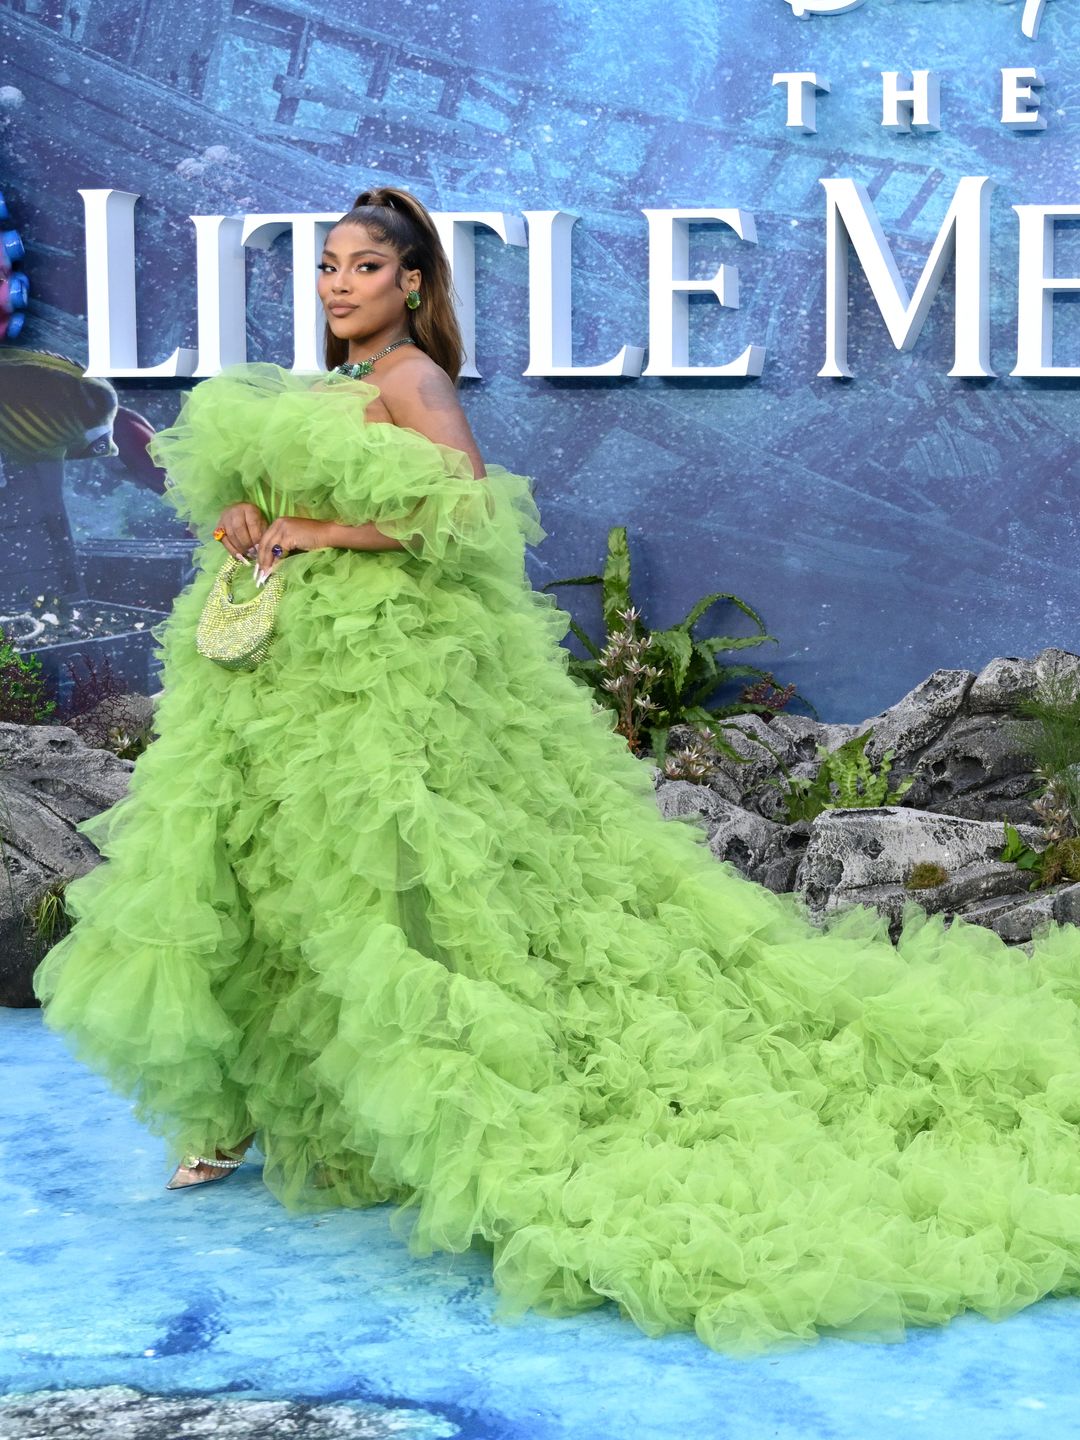 Stefflon Don brought the drama in a green frothy showstopper 